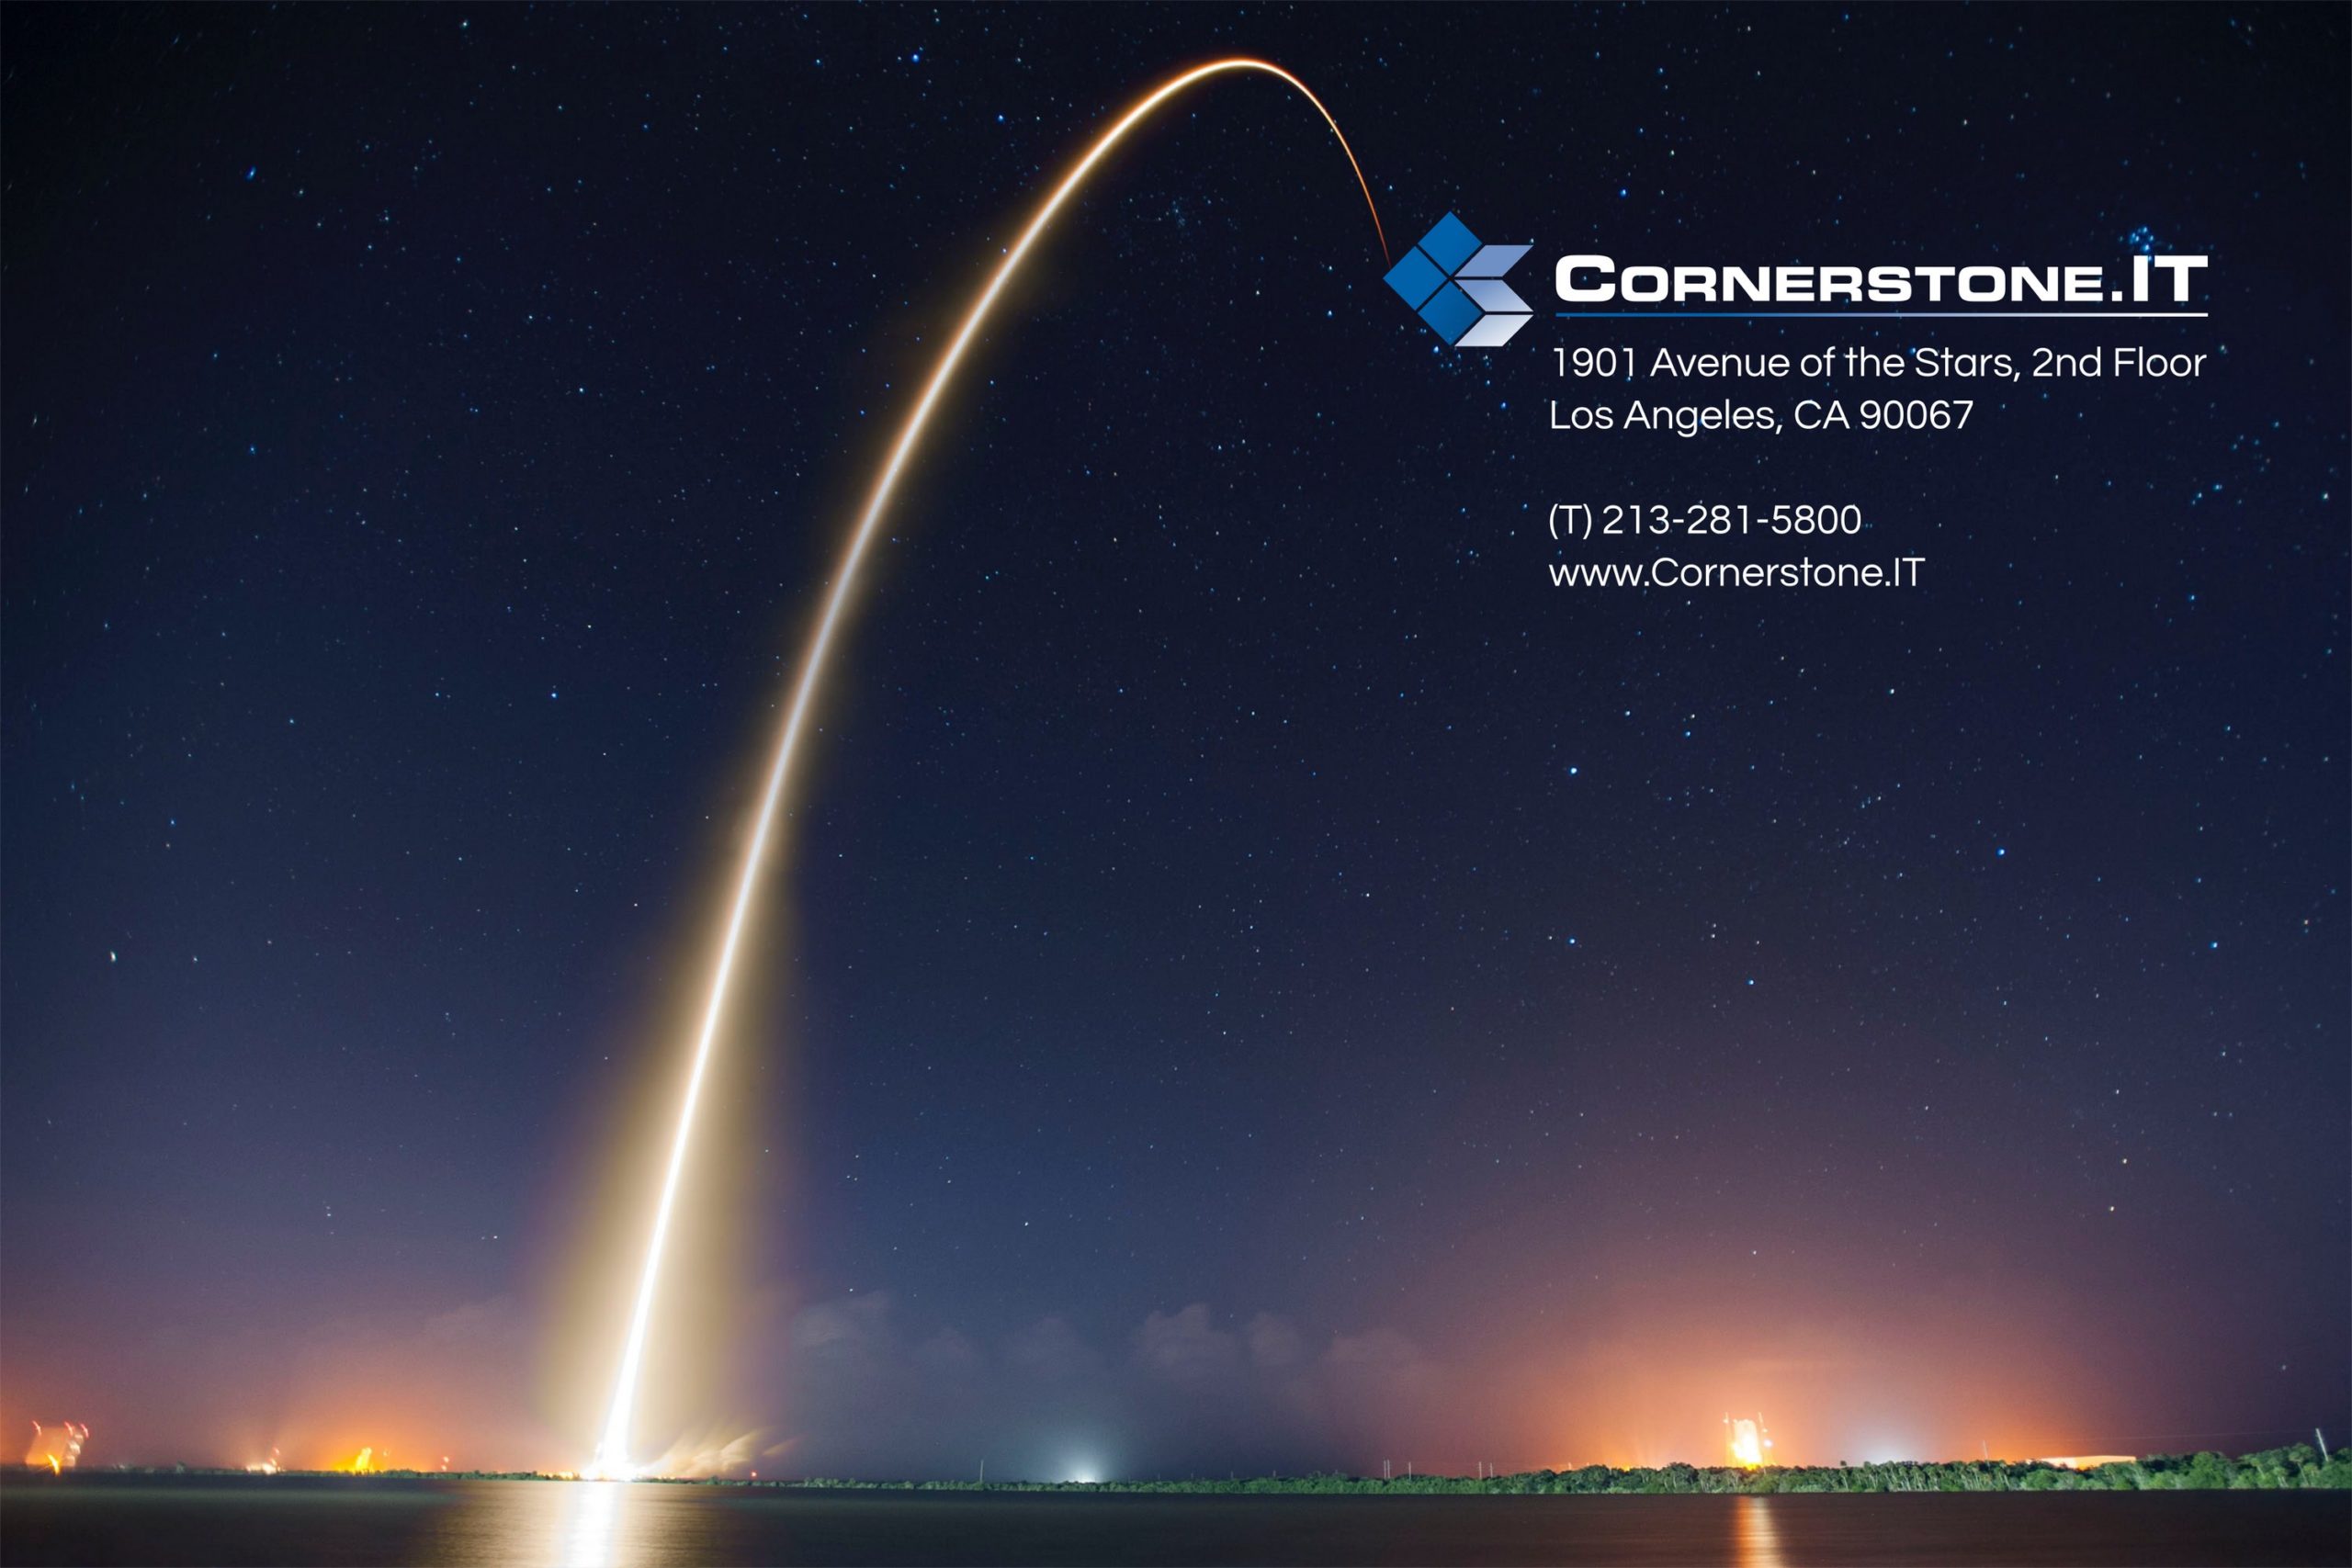 Cornerstone.IT’s LA Office Is Headed for the Stars - featured image